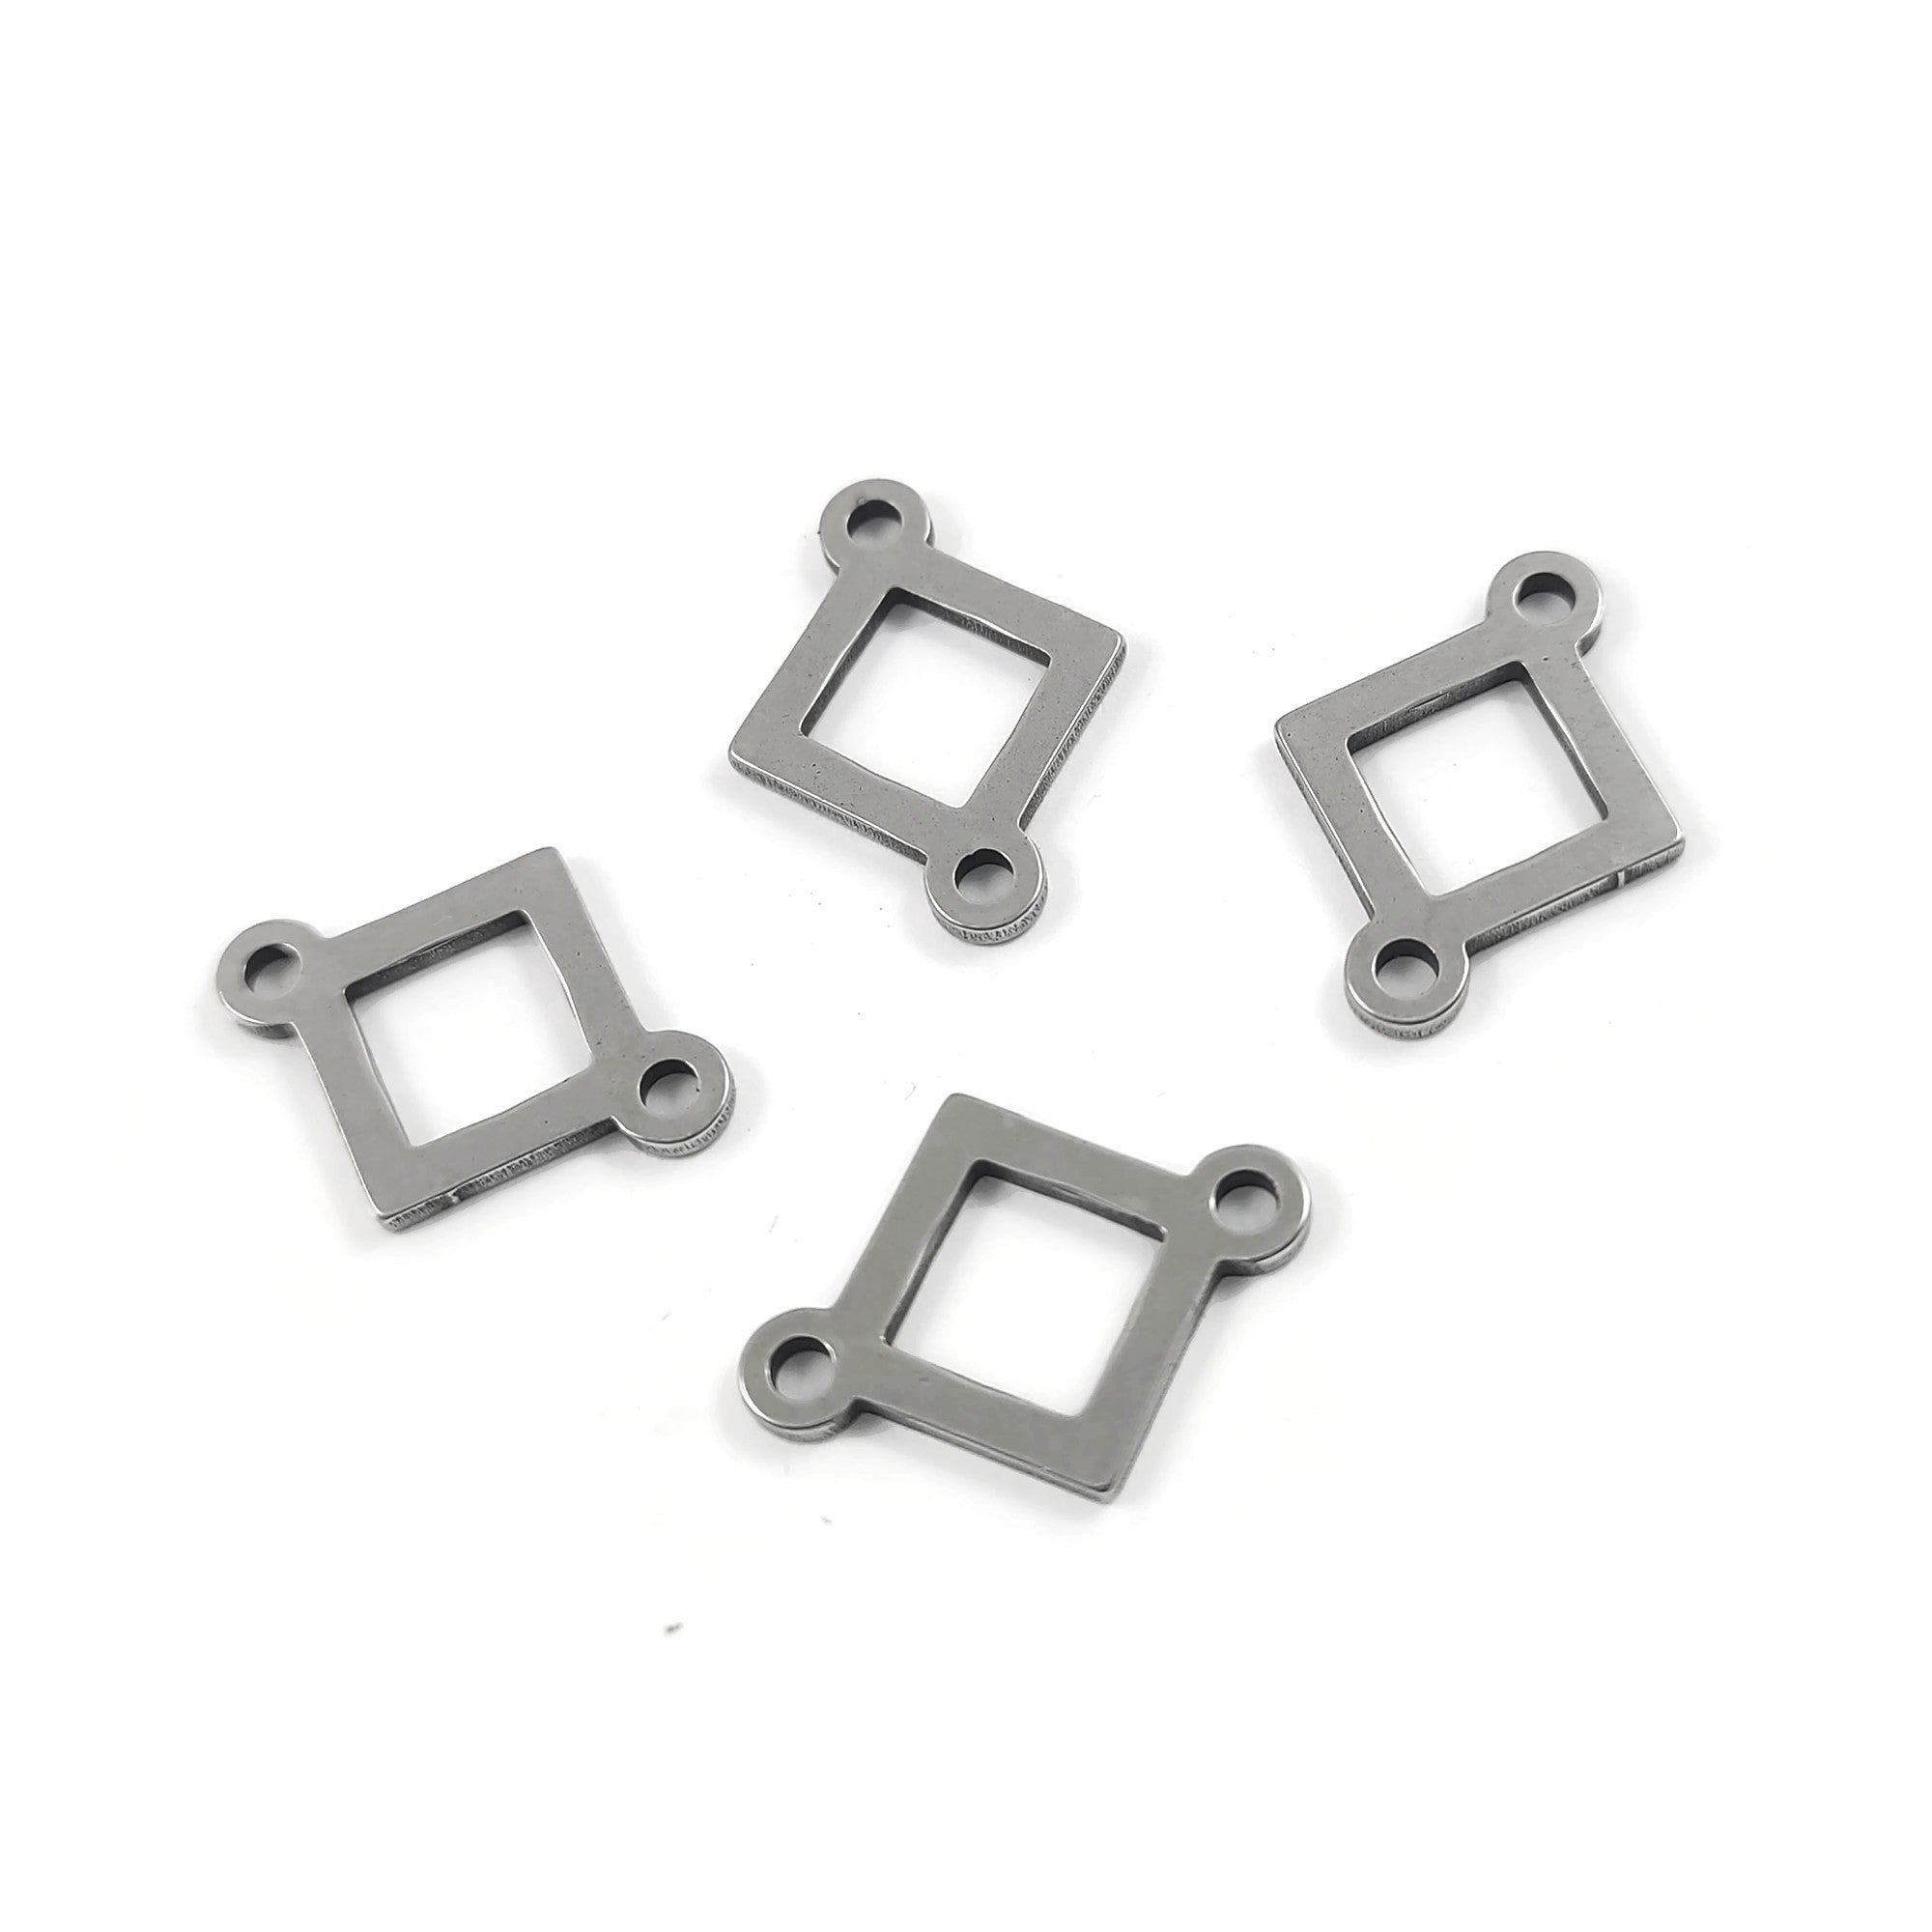 Stainless steel square connectors 12 x 16mm